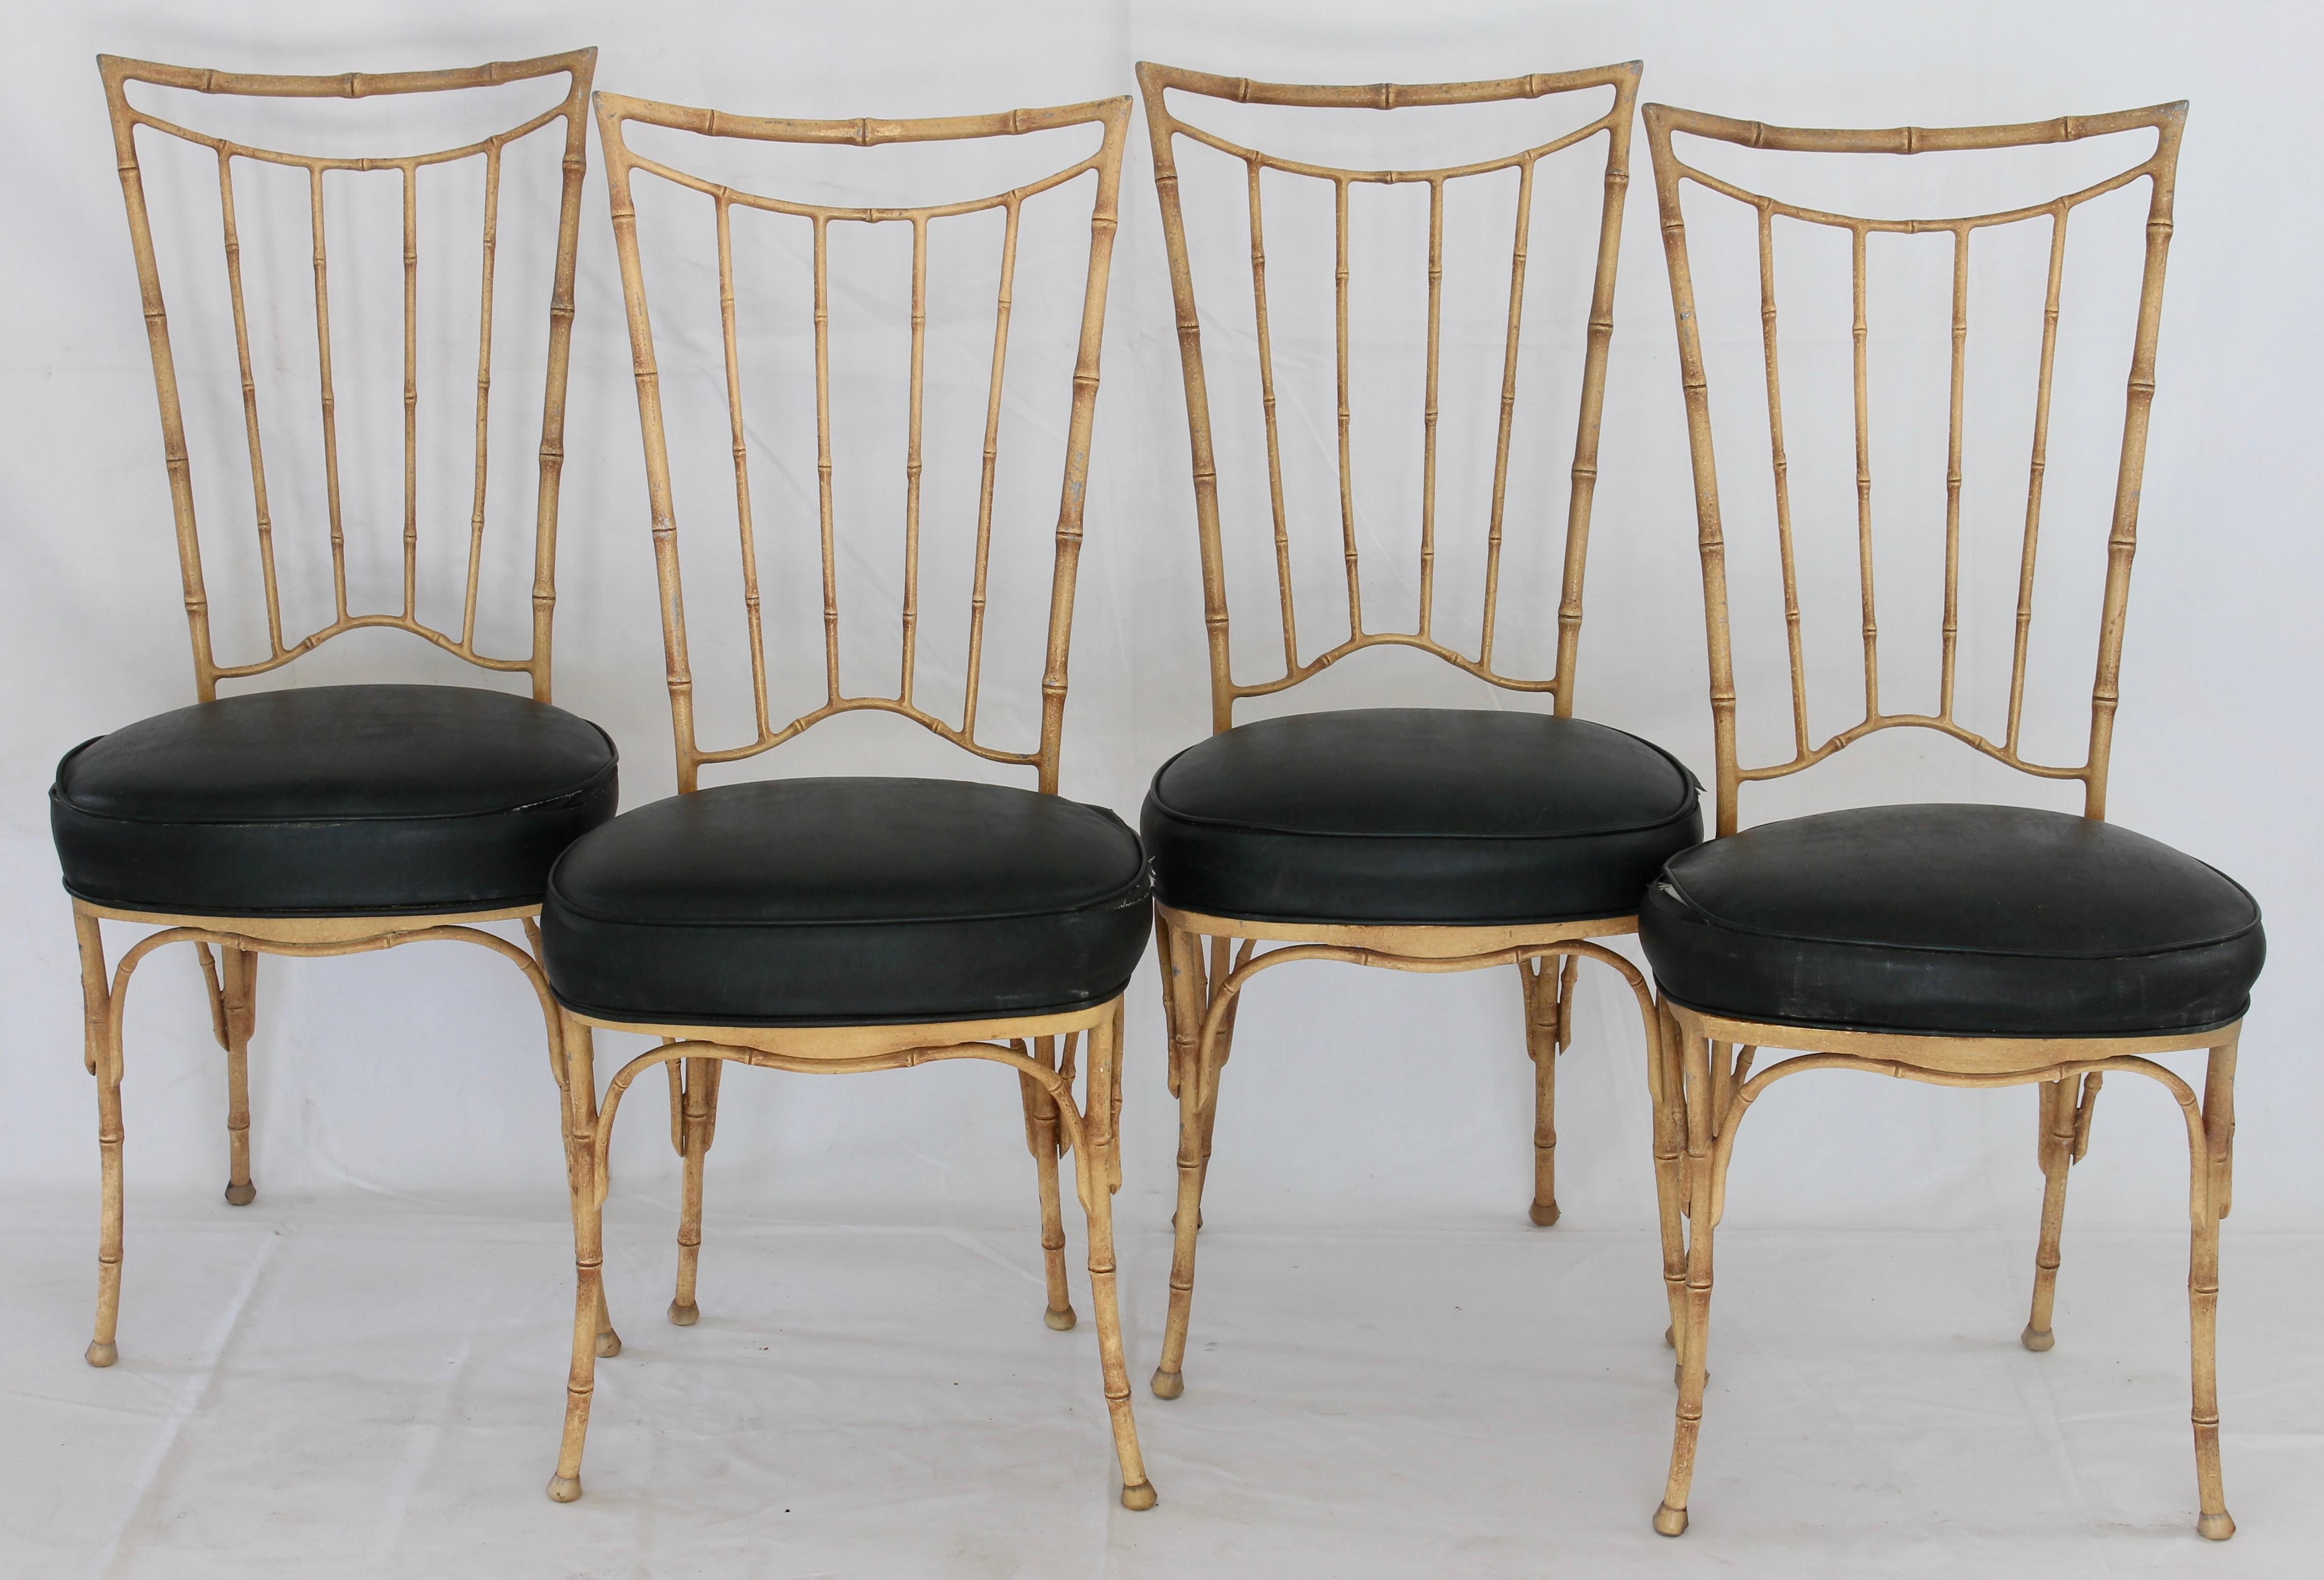 Hollywood Regency Faux Bamboo Table and Chairs For Sale